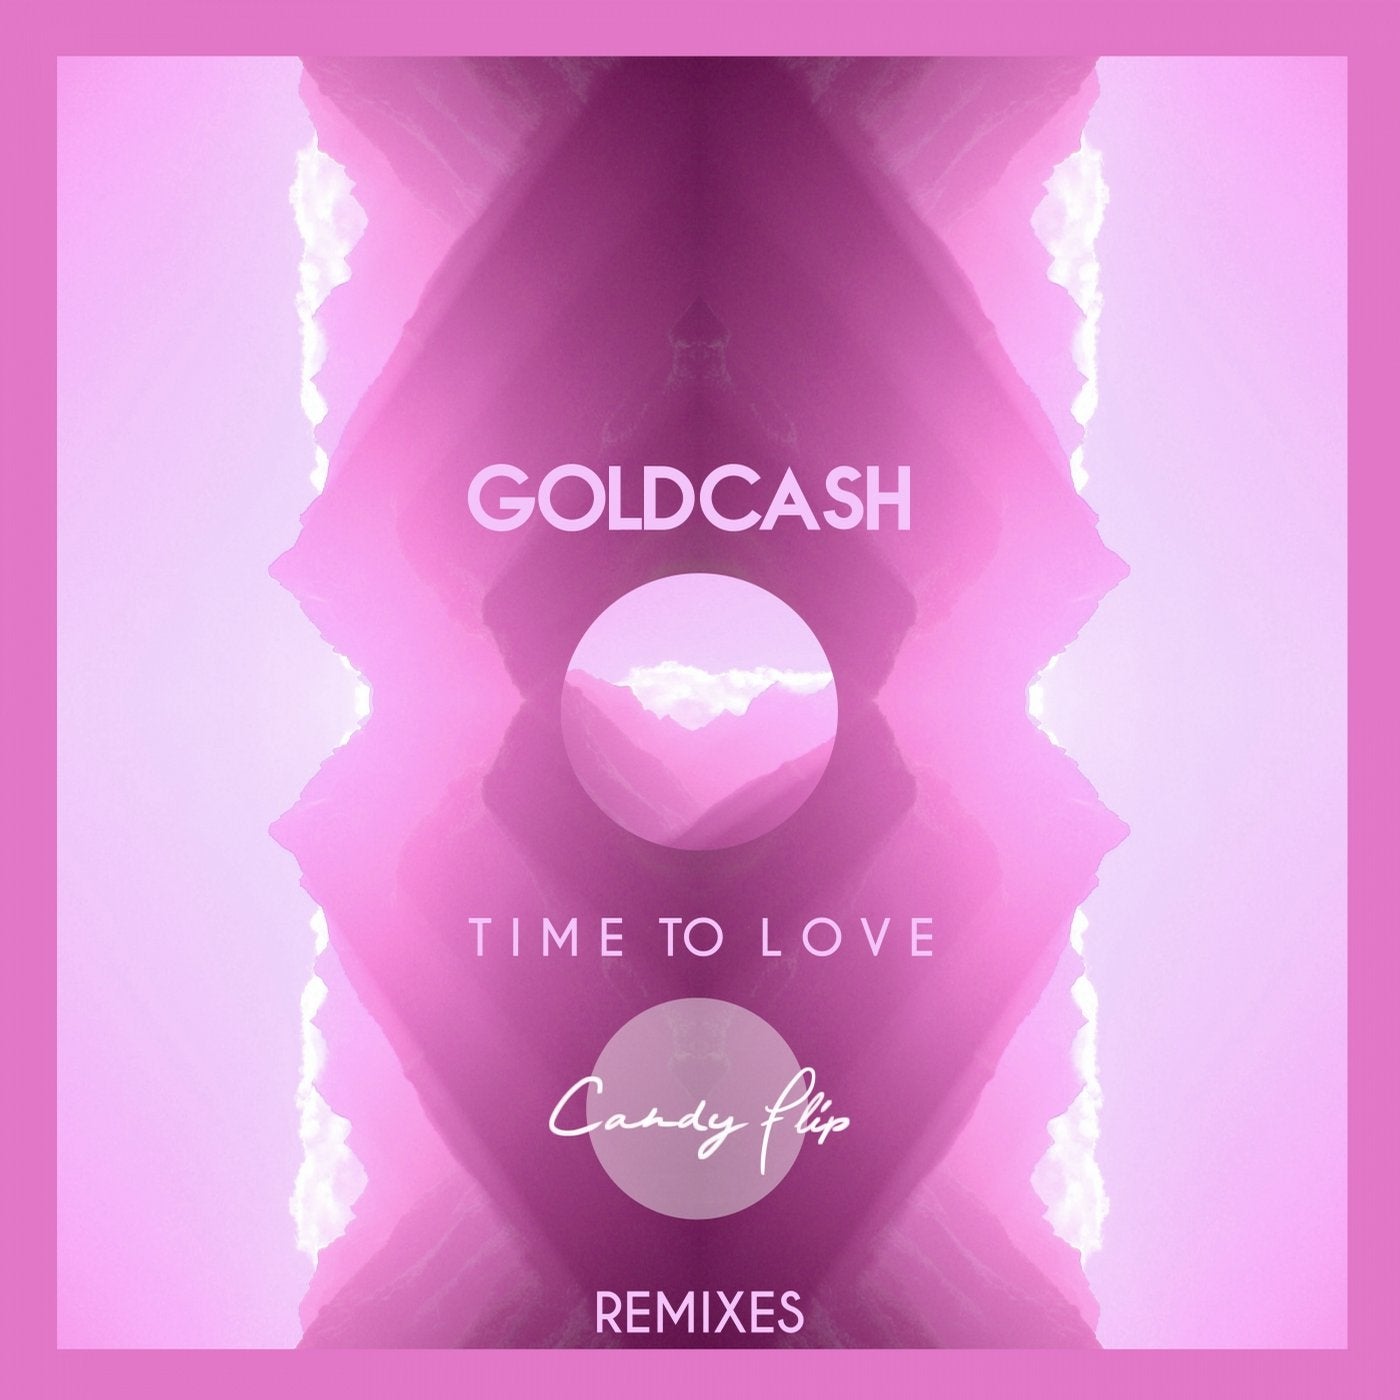 G love remix. Time to Love. To Love re. Lovely песня ремикс. Candy Remix.